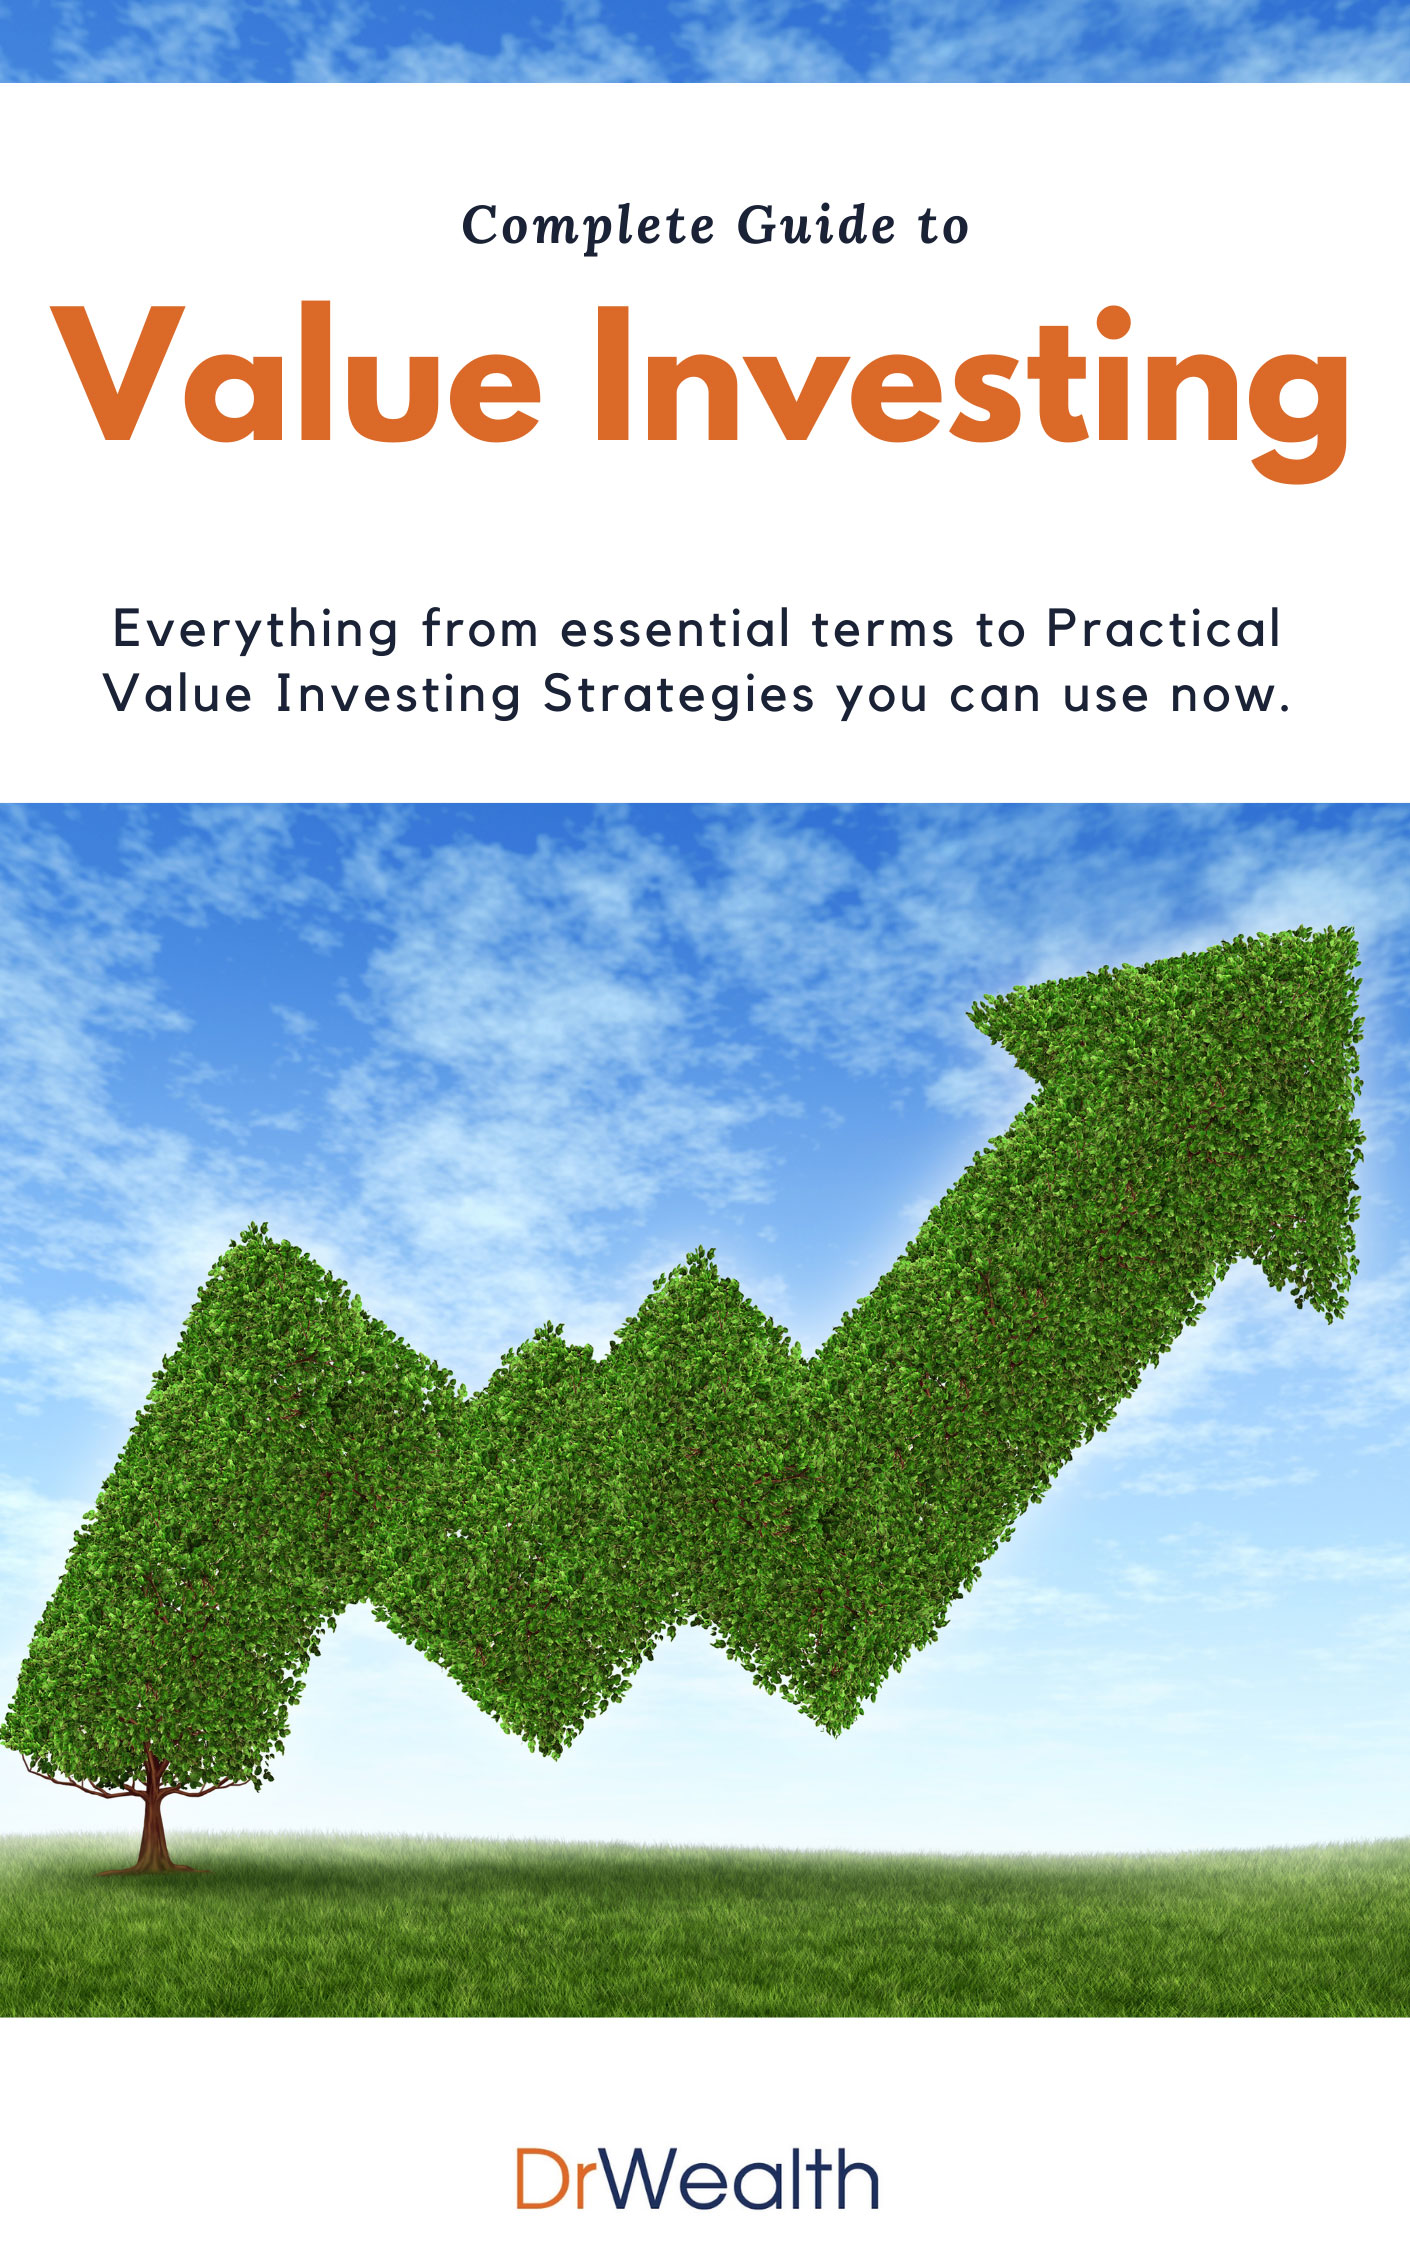 Complete Guide to Value Investing